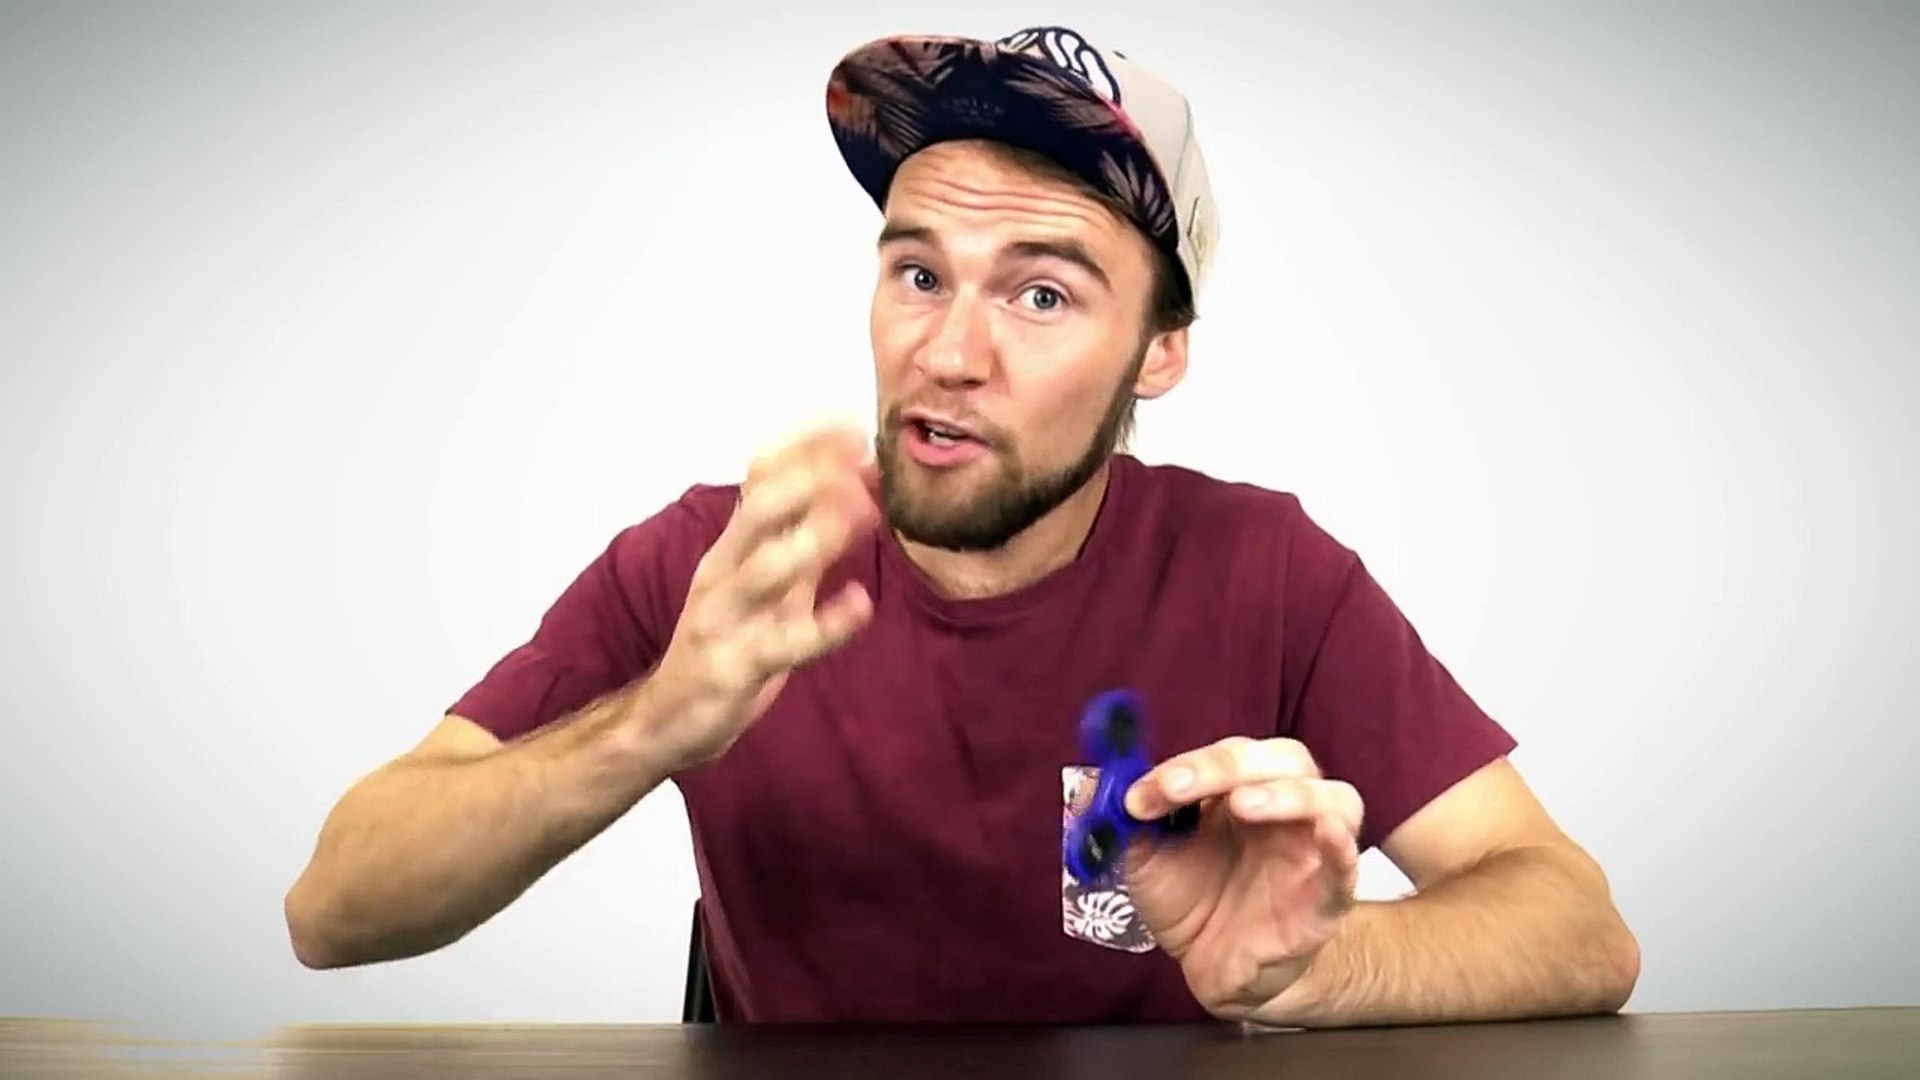 Fidget Spinner Tricks With a Professional Fidgeter - video Dailymotion